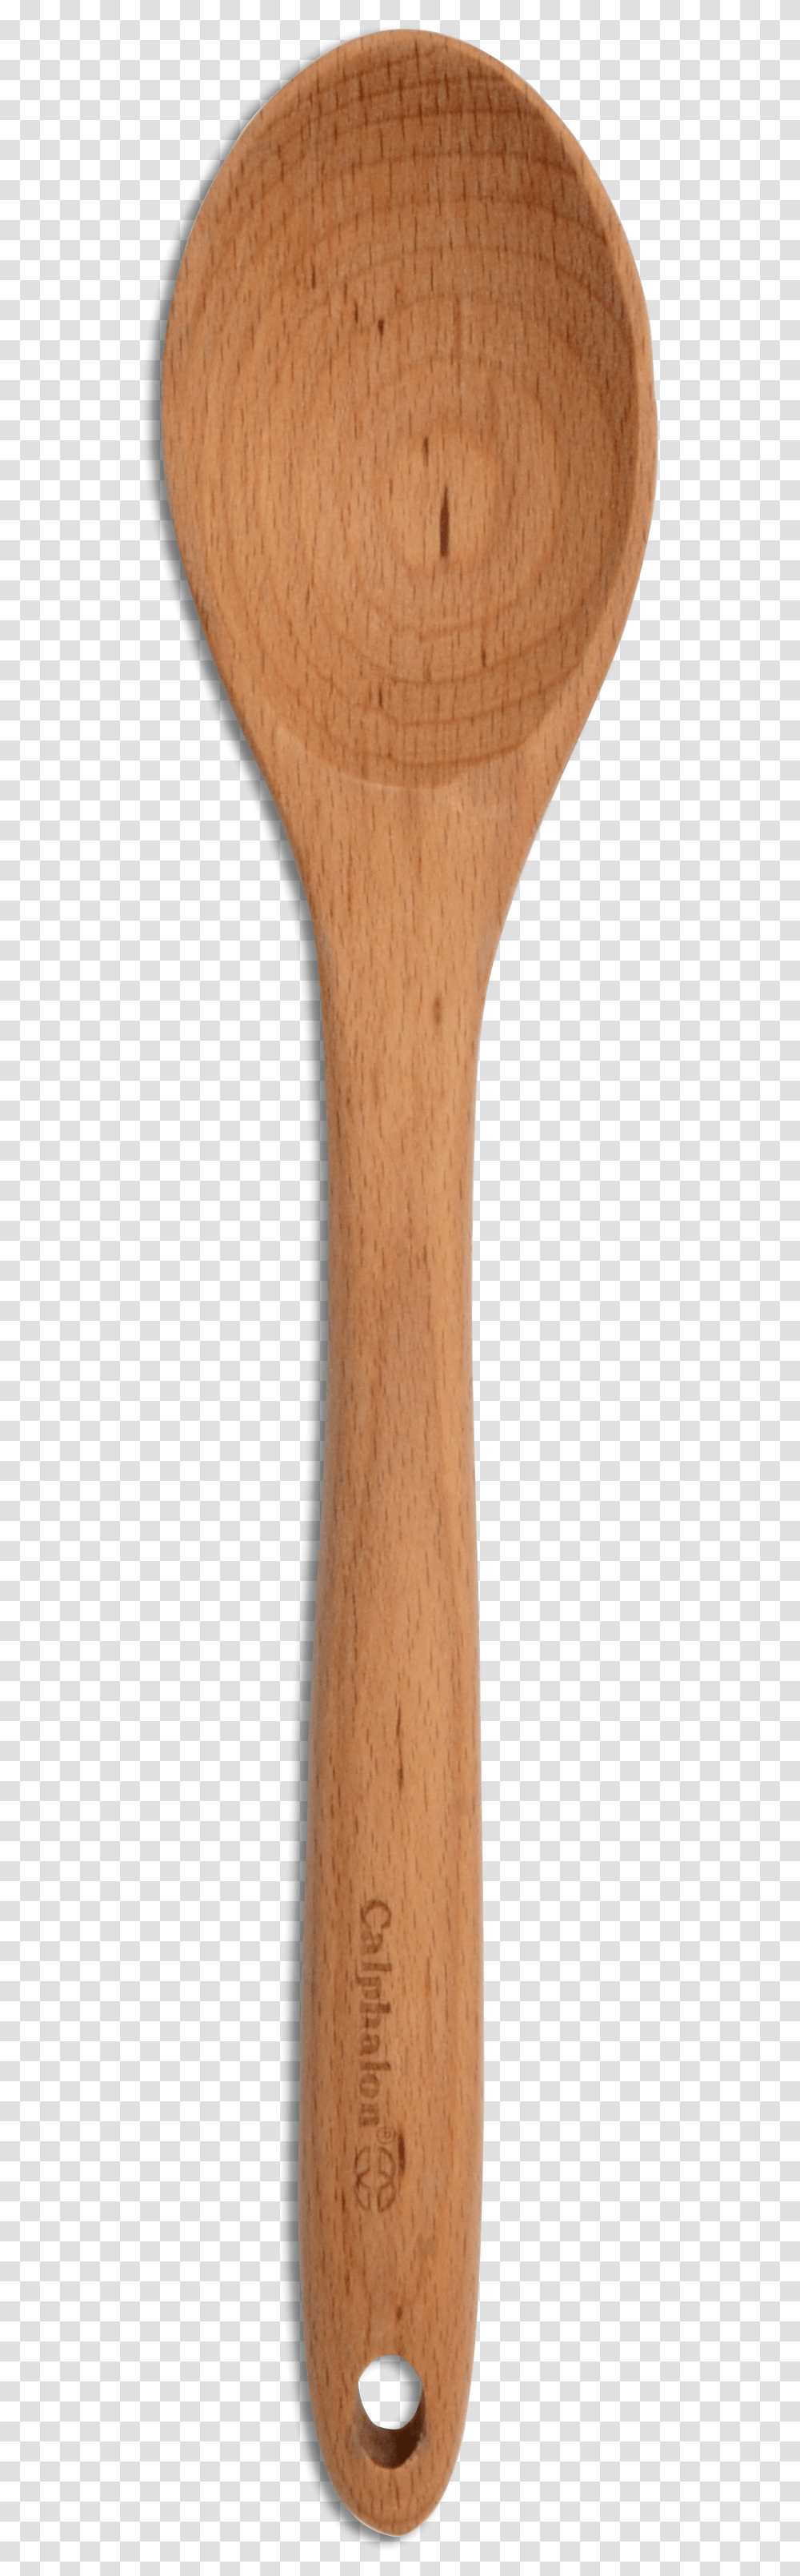 Calphalon Wooden Spoon Wood Spoon Top View, Cutlery, Tool, Fork, Axe Transparent Png